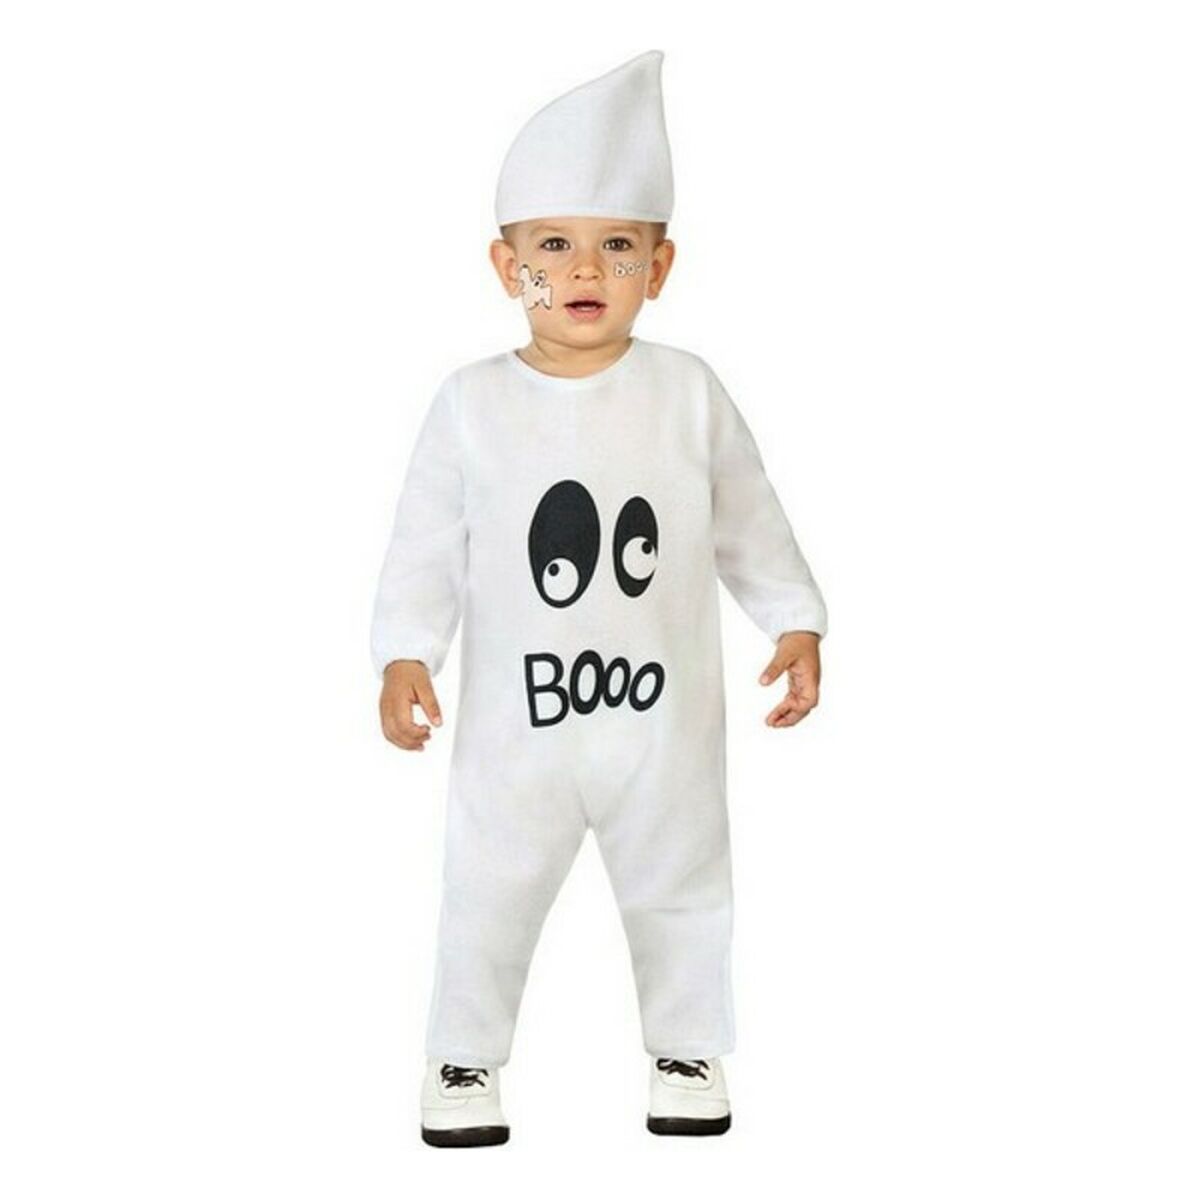 Costume for Babies White 24 Months